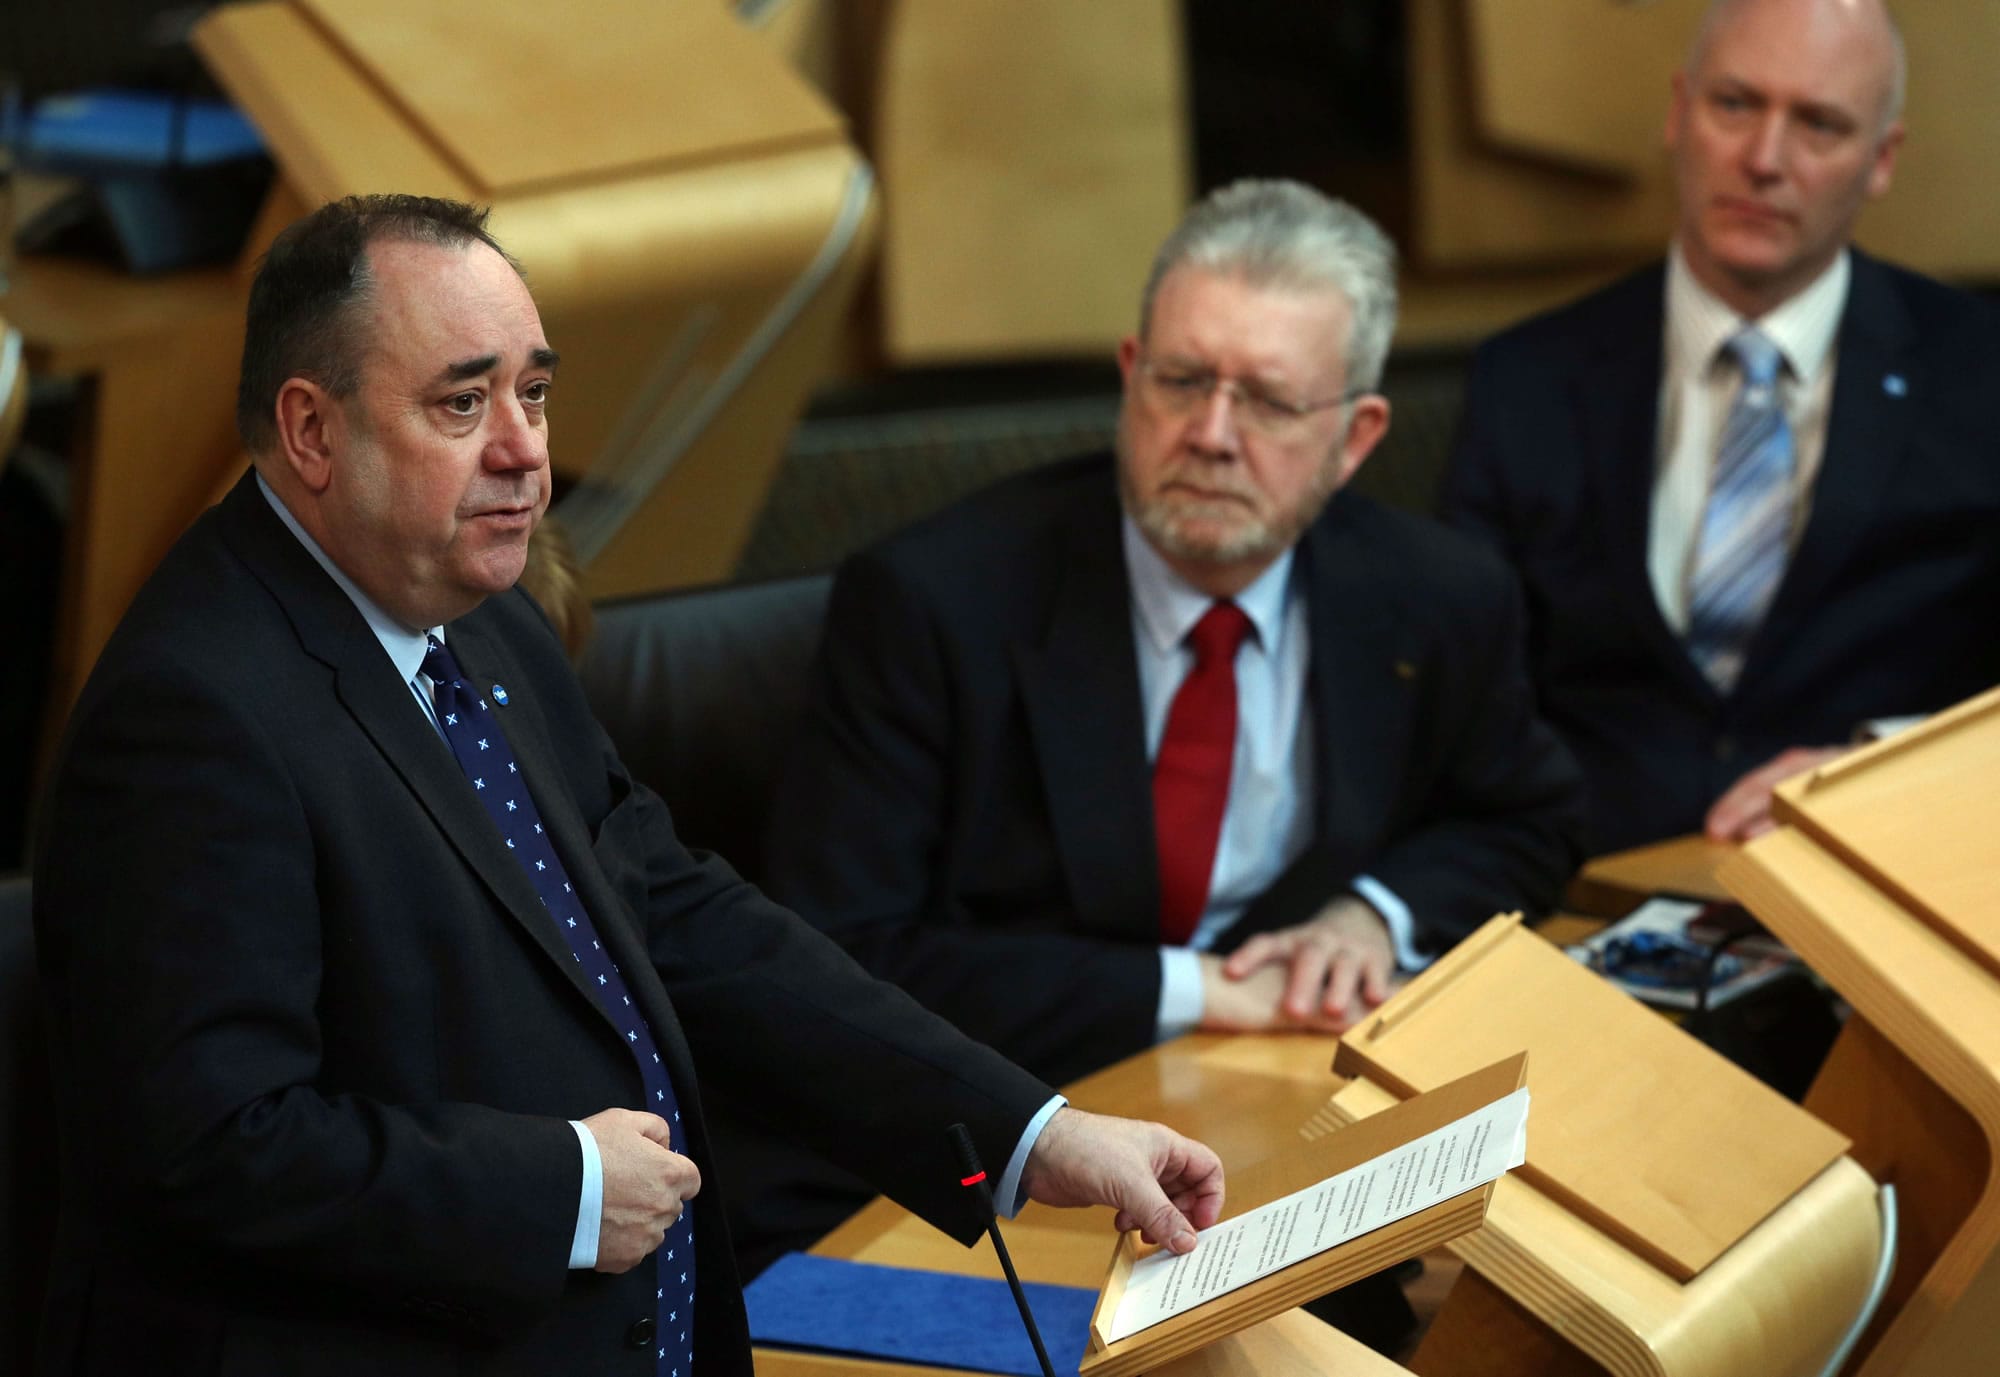 Scottish First Minister Alex Salmond gives a ministerial statement including an announcement of the date of the independence referendum at the Scottish parliament in Edinburgh on Thursday. Scots will vote on whether or not the country should become independent on Sept.